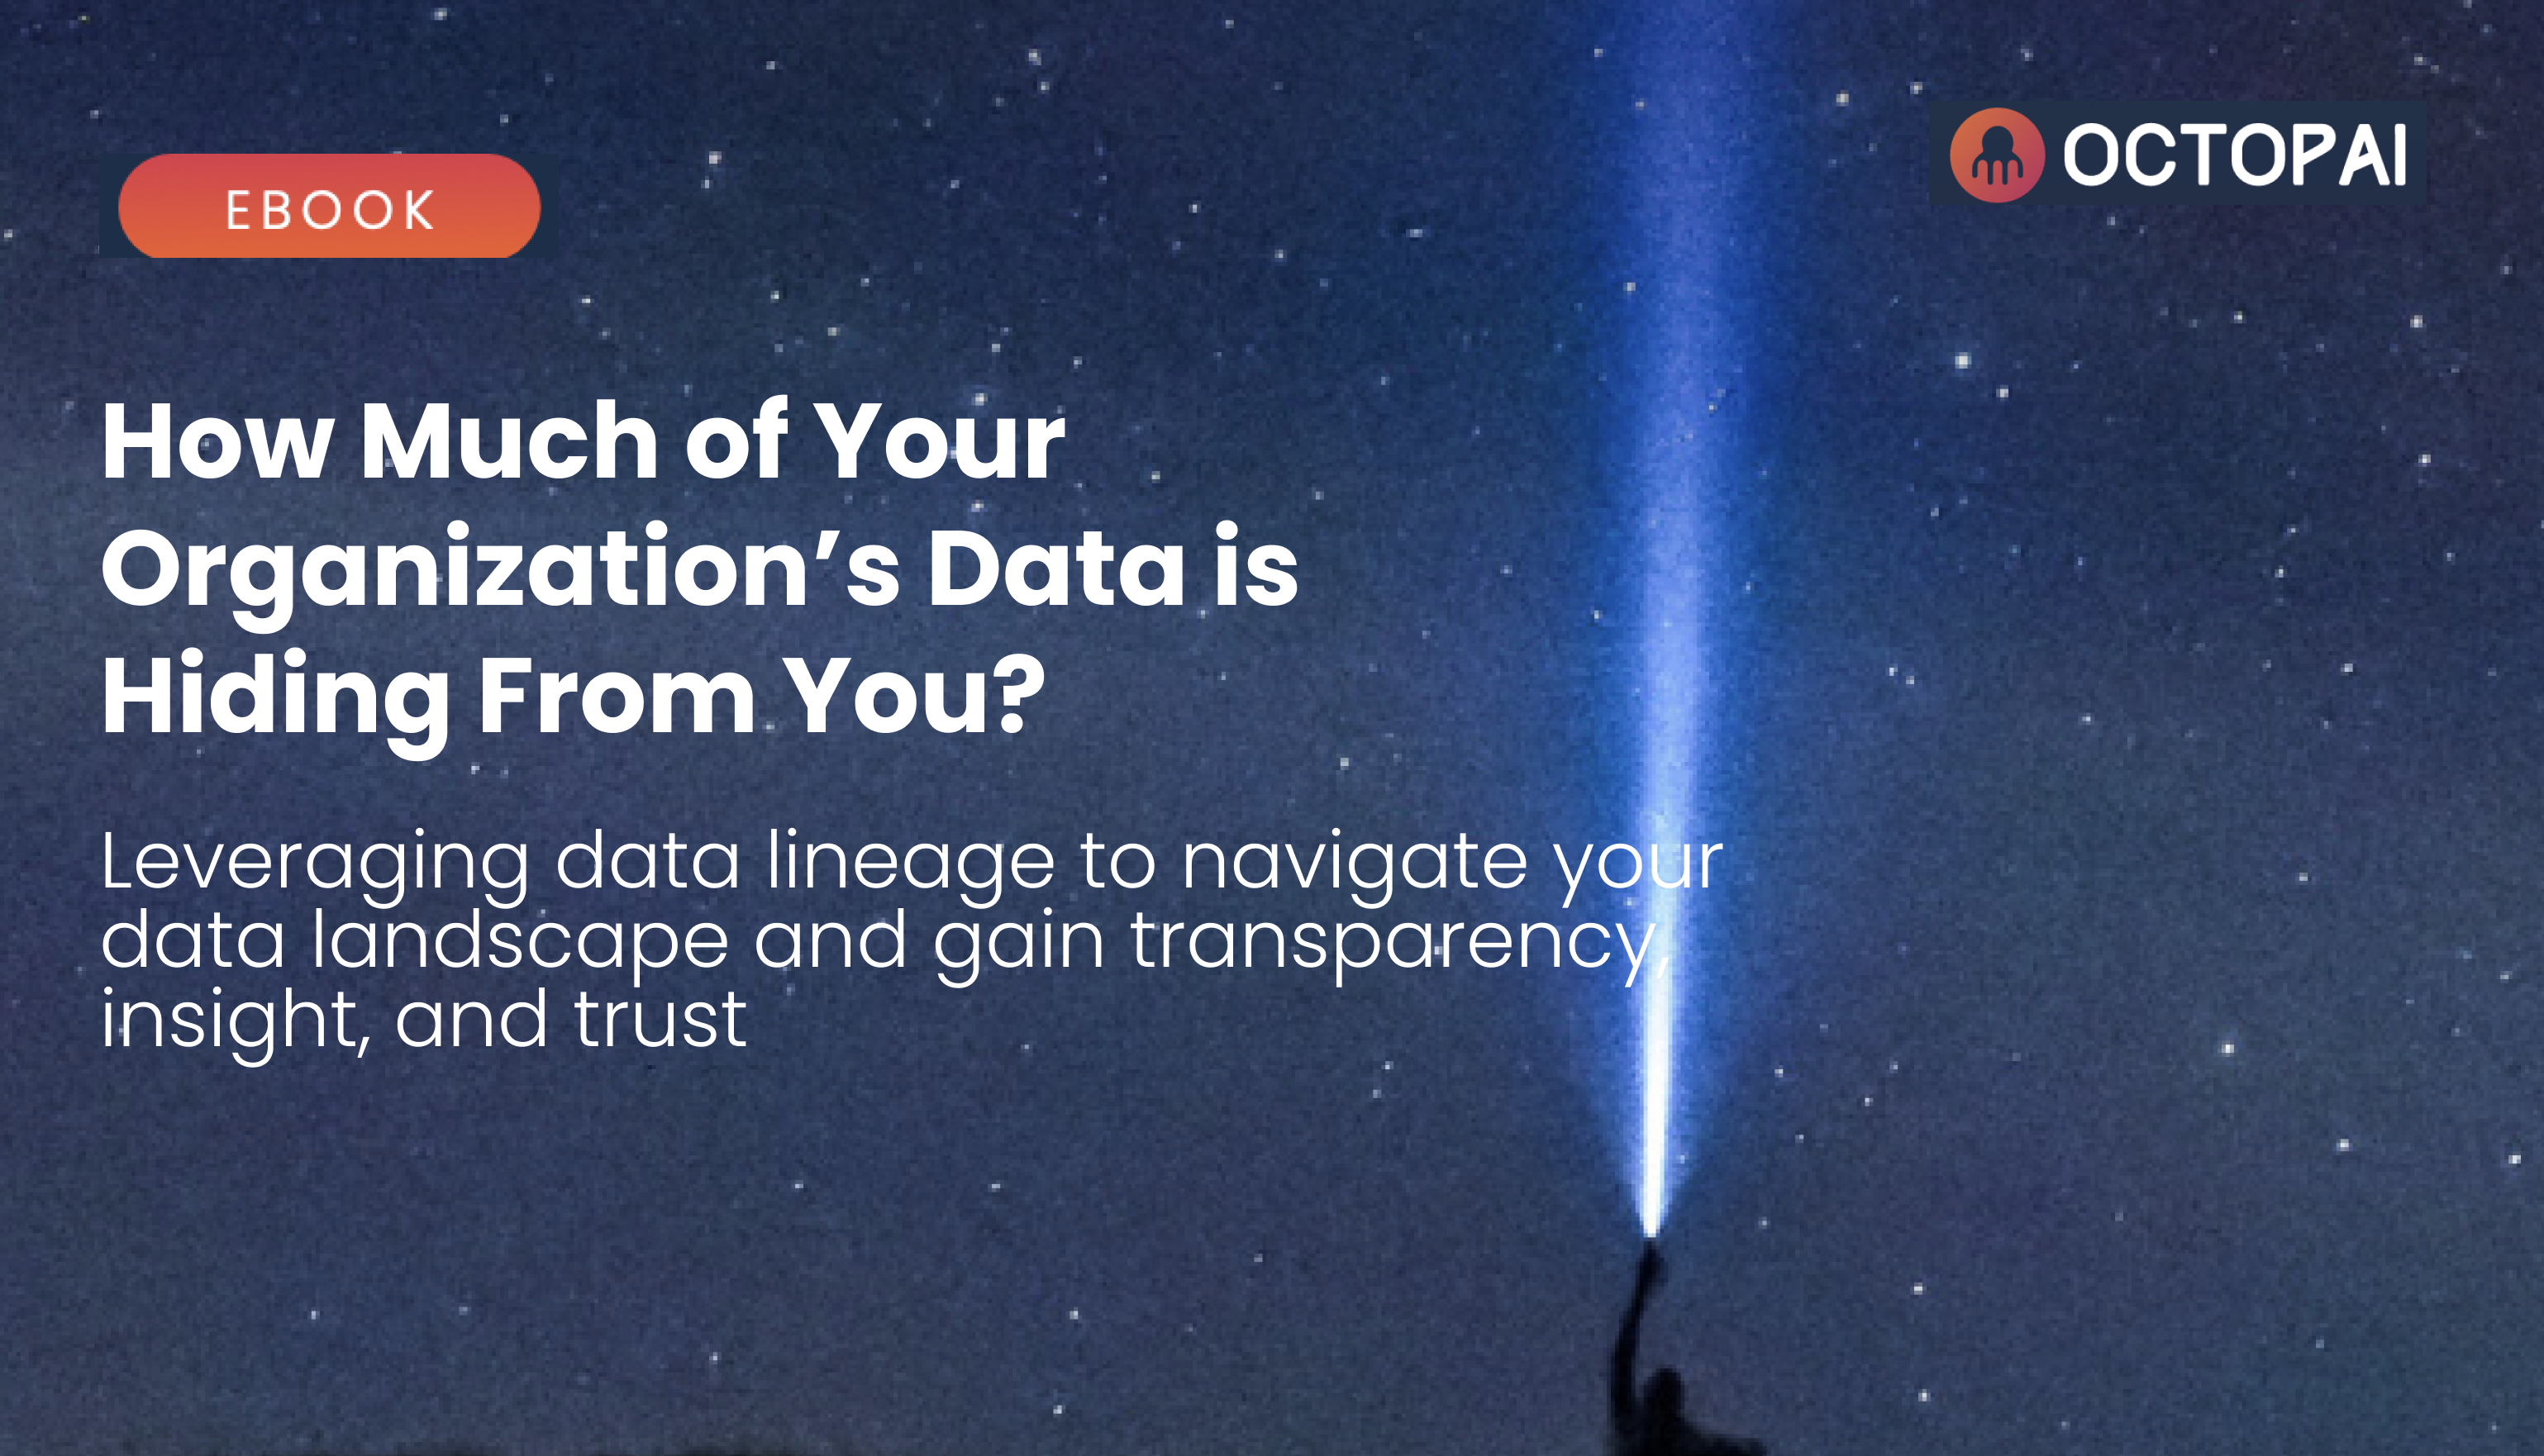 How Much of Your Organization’s Data is Hiding From You?